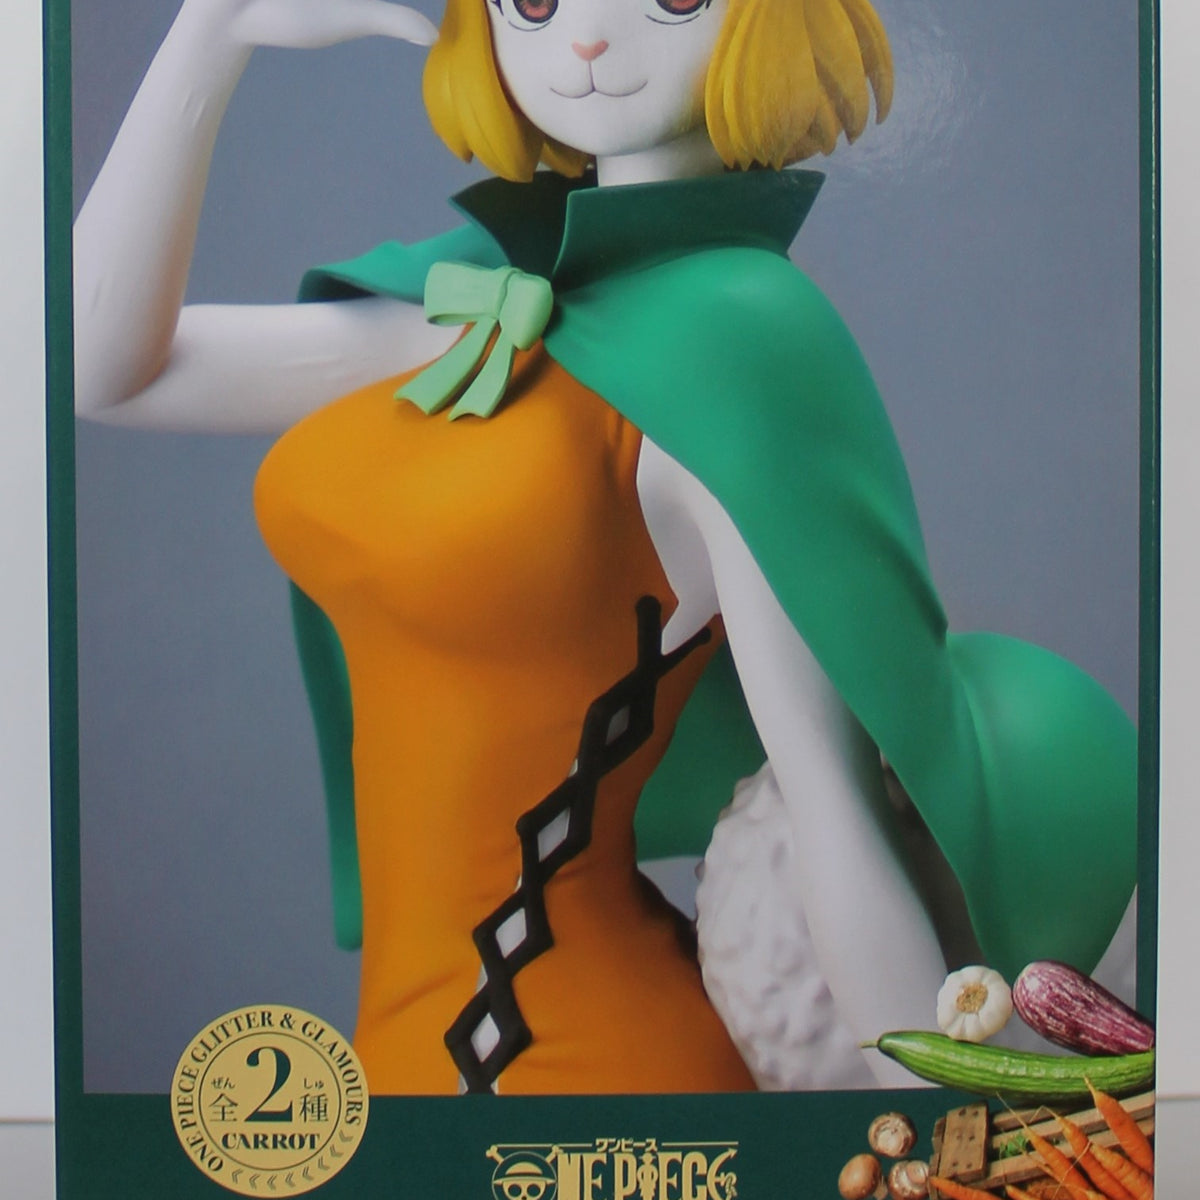 One Piece Carrot Version A Glitter & Glamours Figure